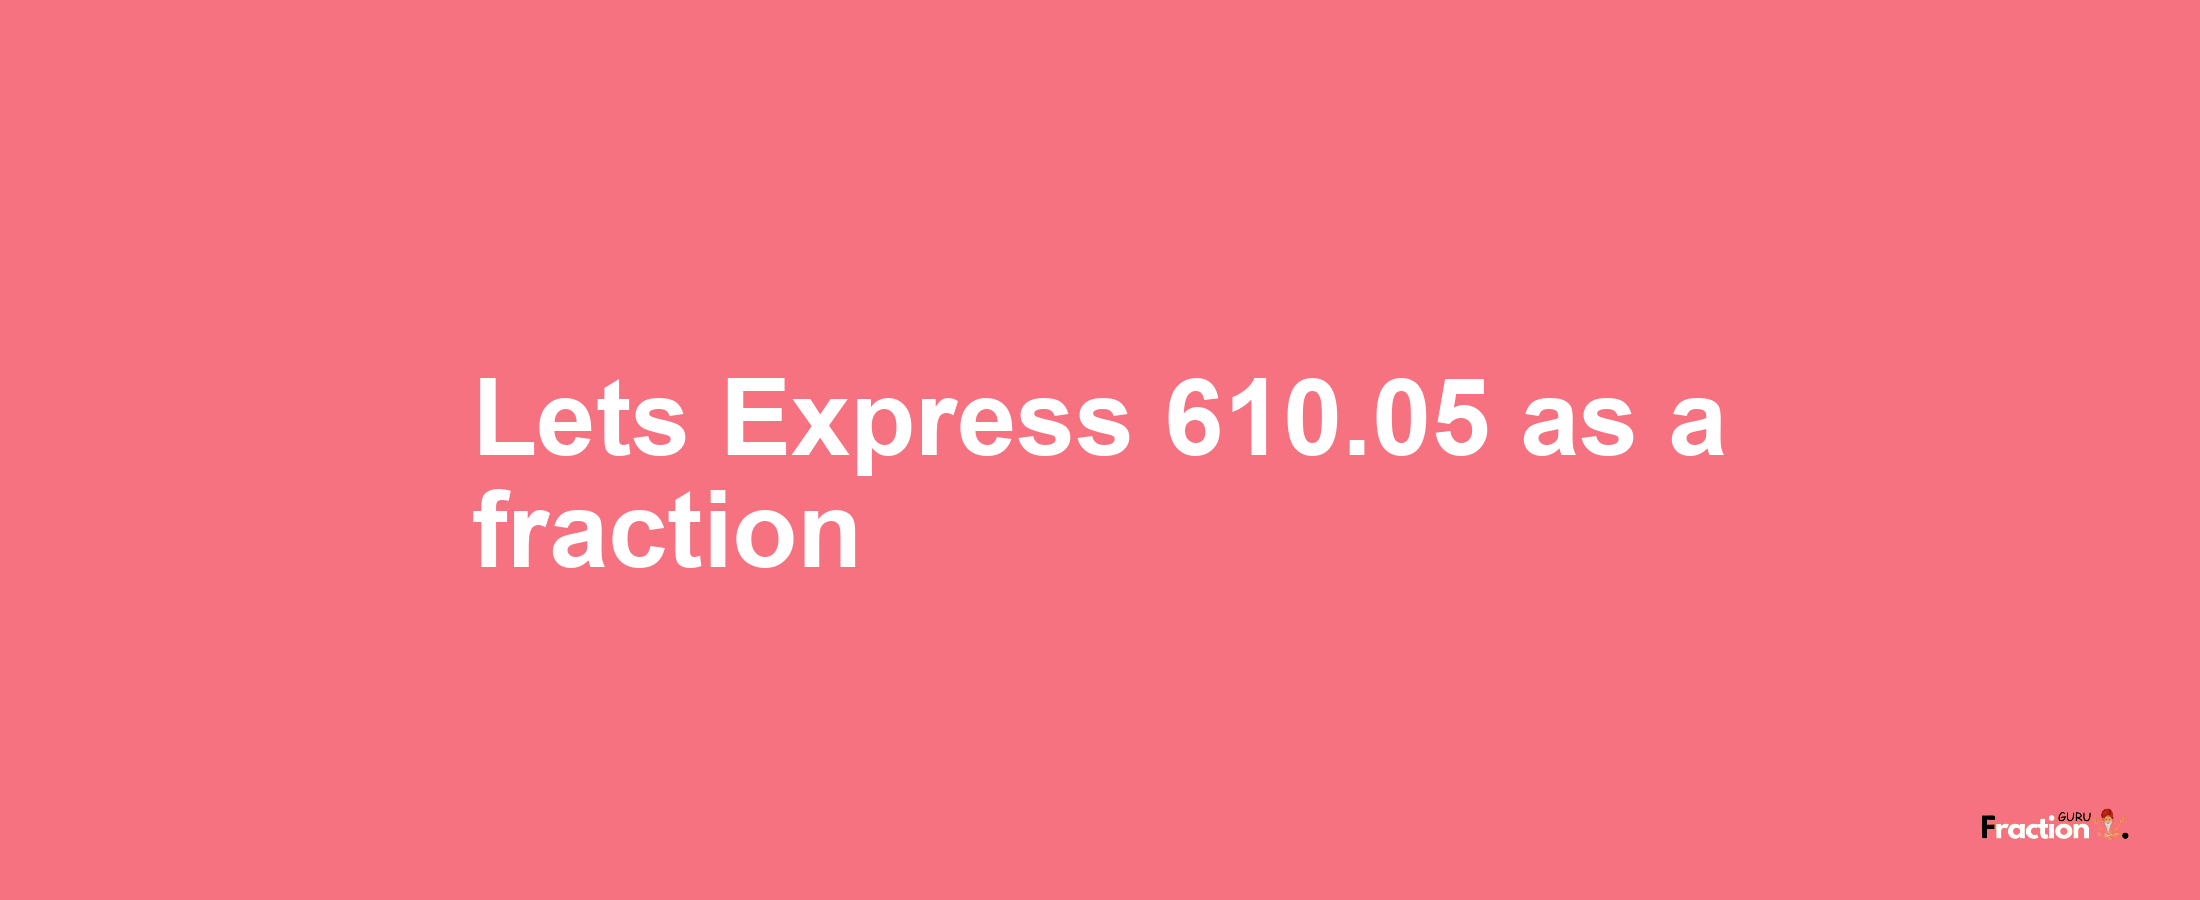 Lets Express 610.05 as afraction